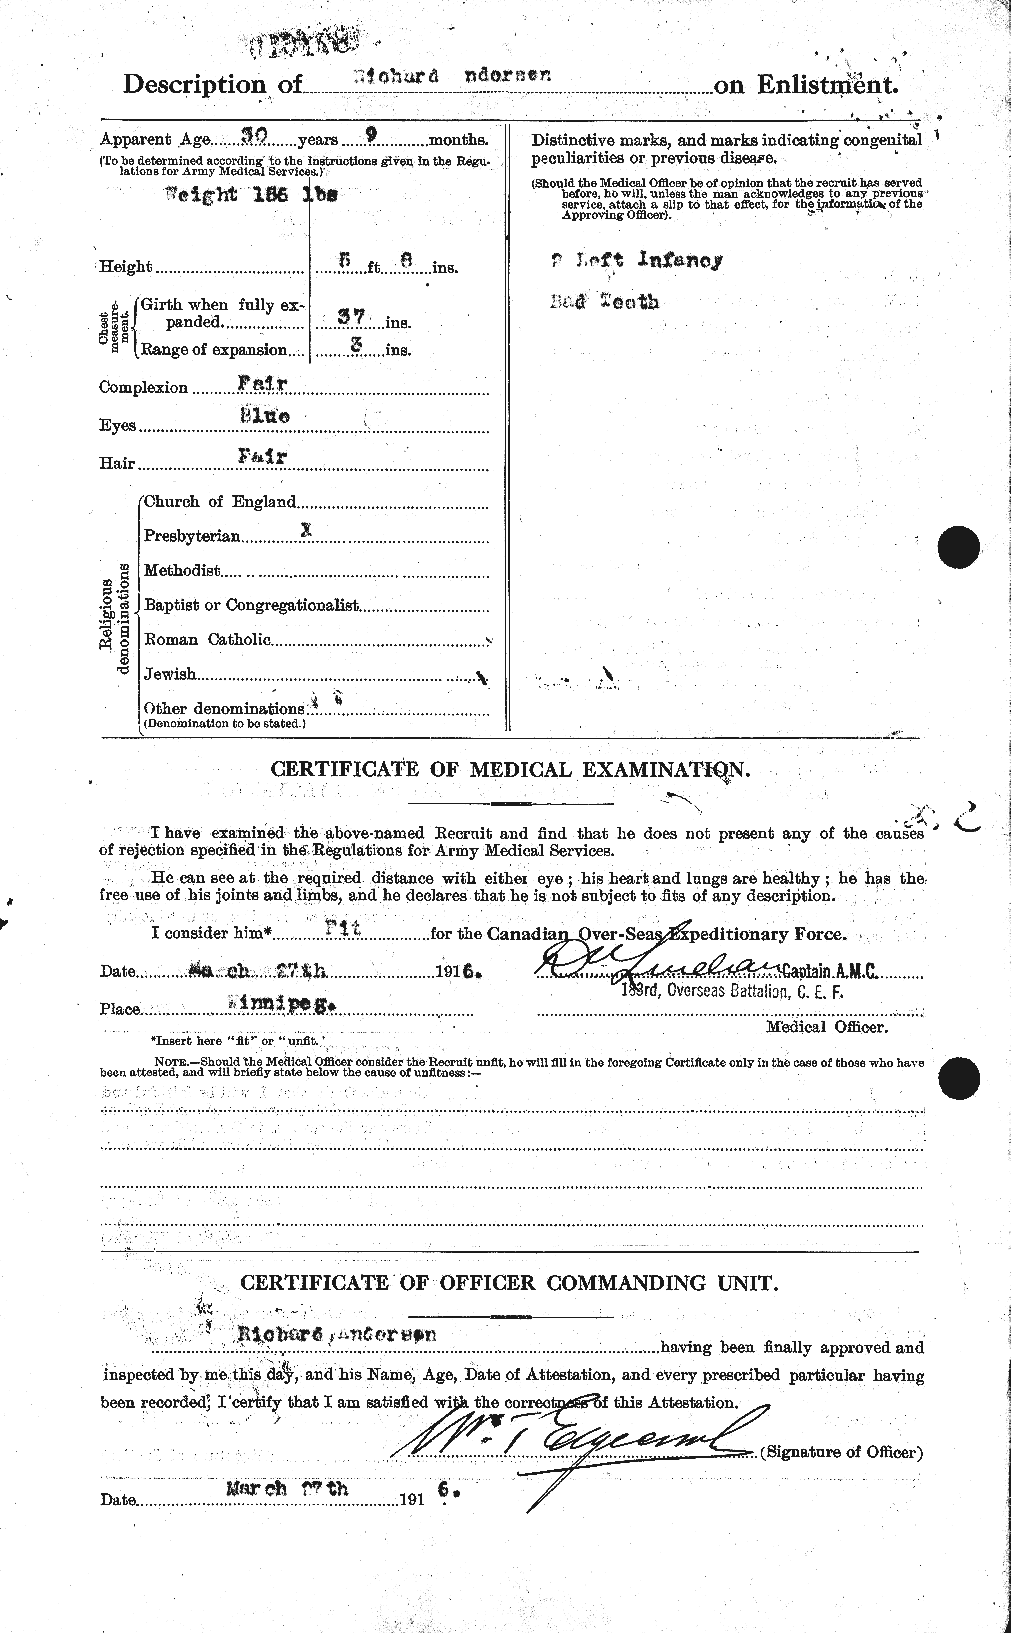 Personnel Records of the First World War - CEF 207319b